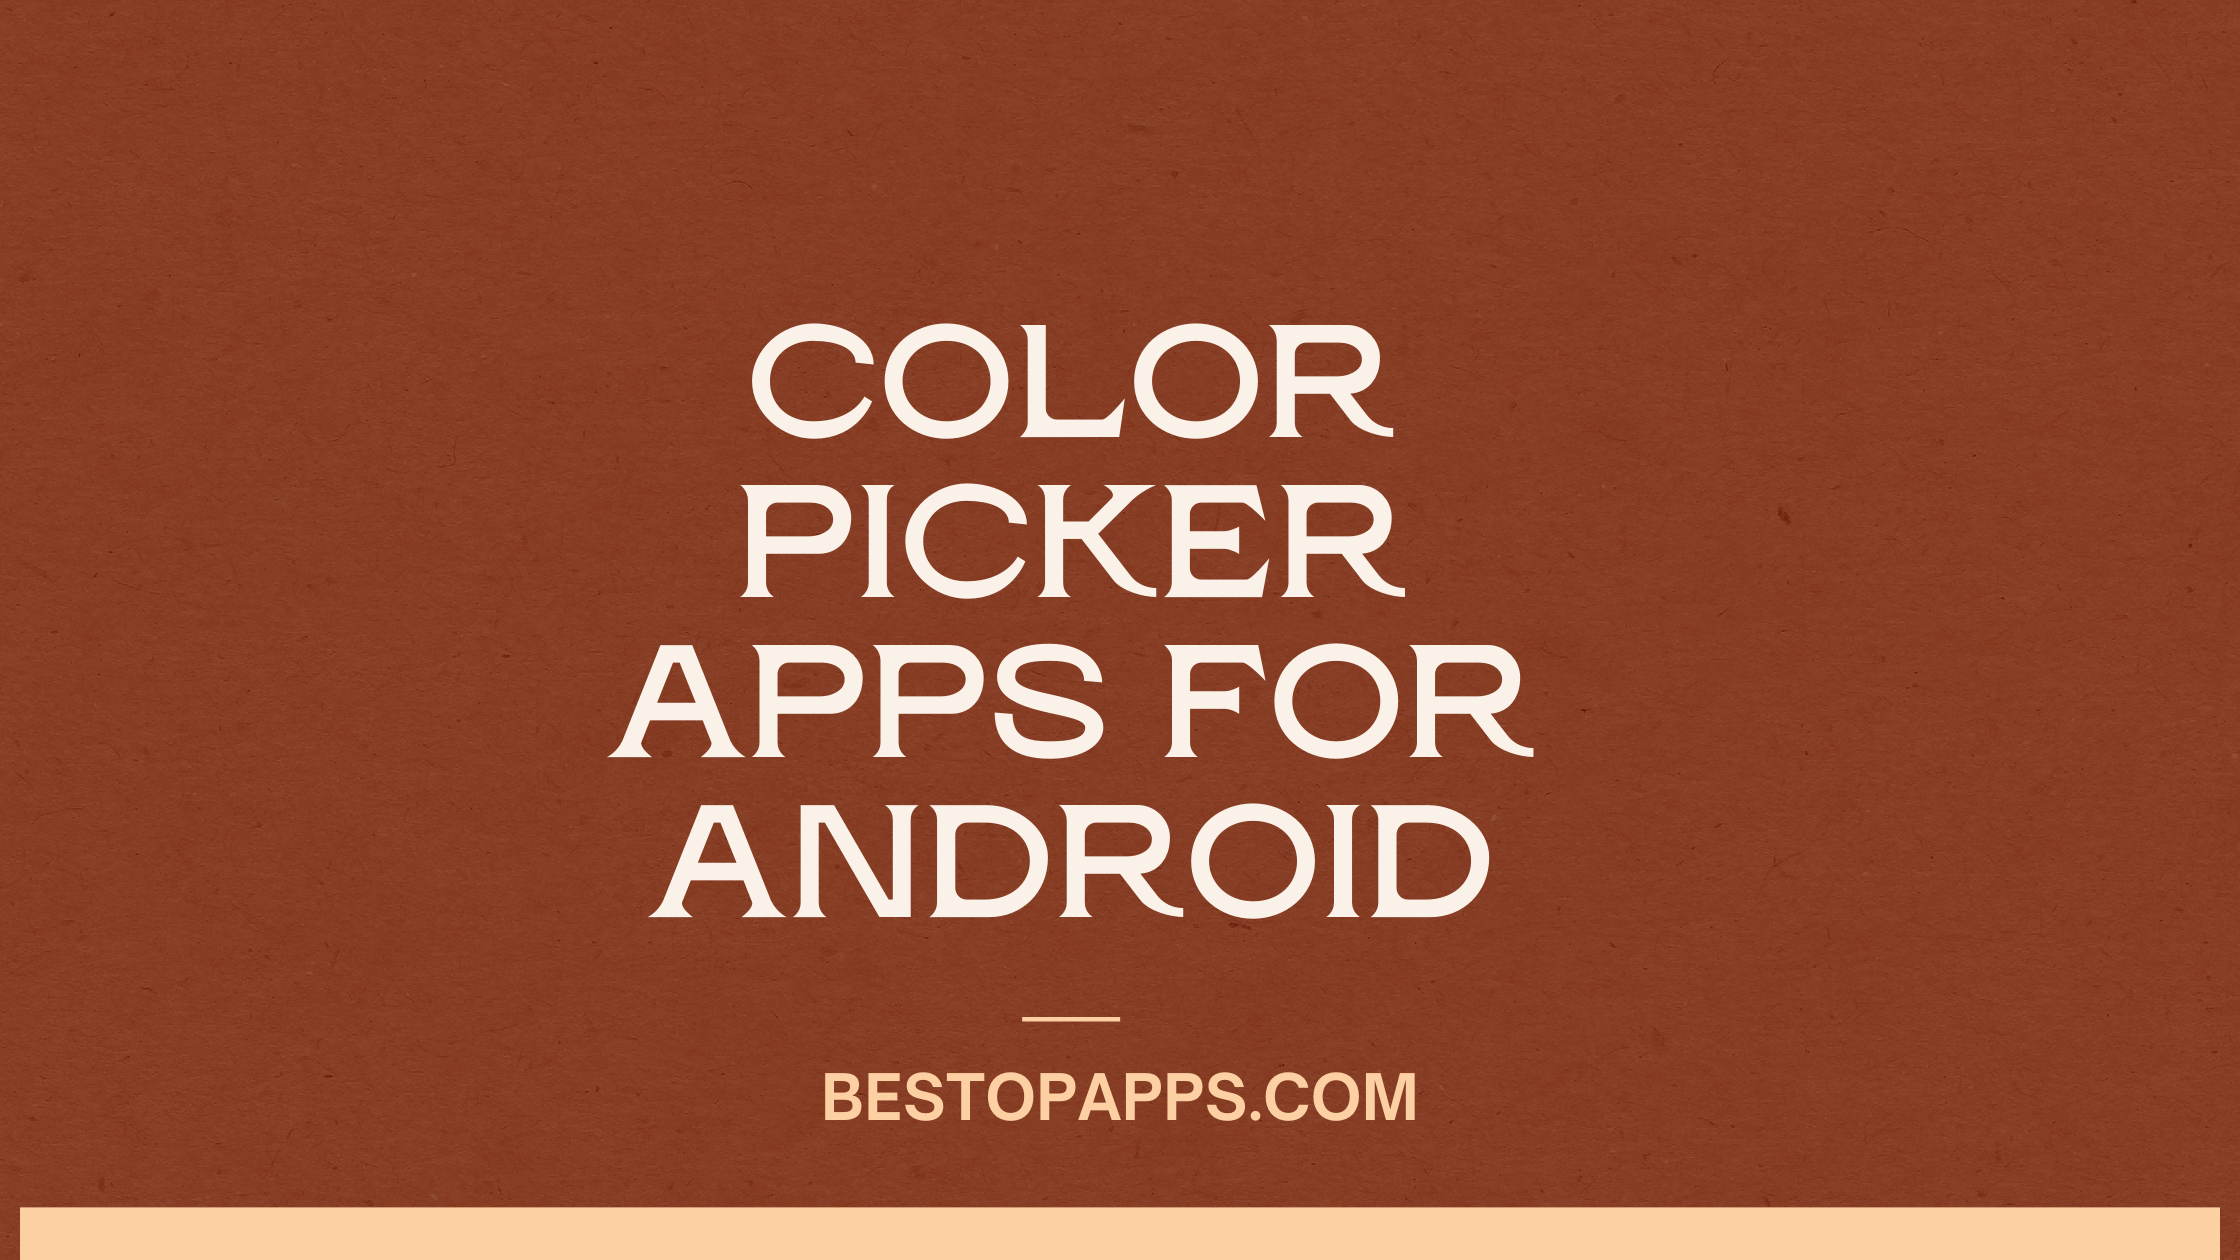 Color Picker Apps for Android